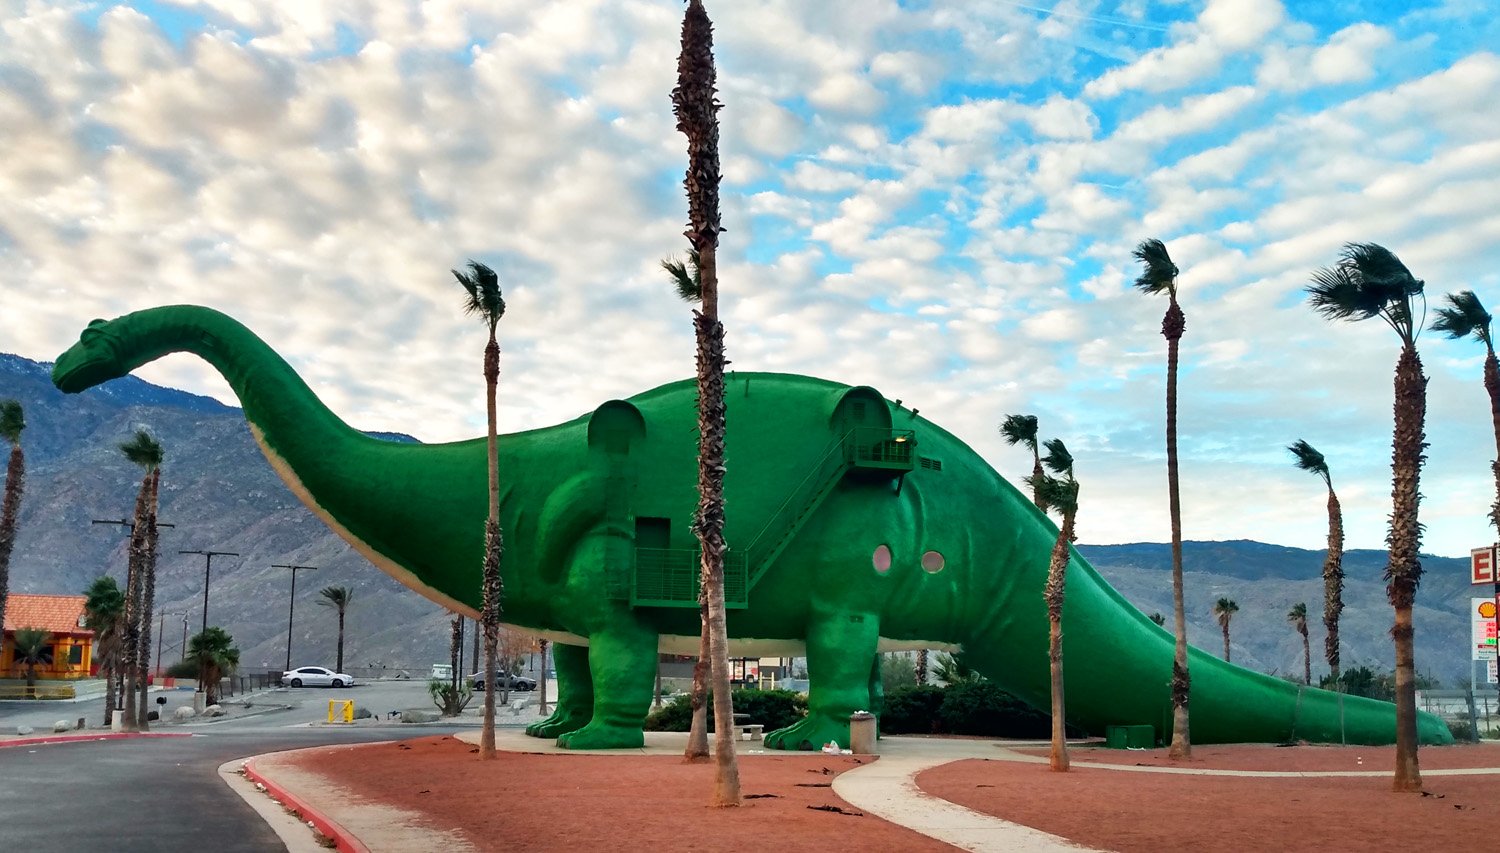 Then onward to the east to the famous (?) Cabazon Dinosaurs. I believe it used to be a restaurant.